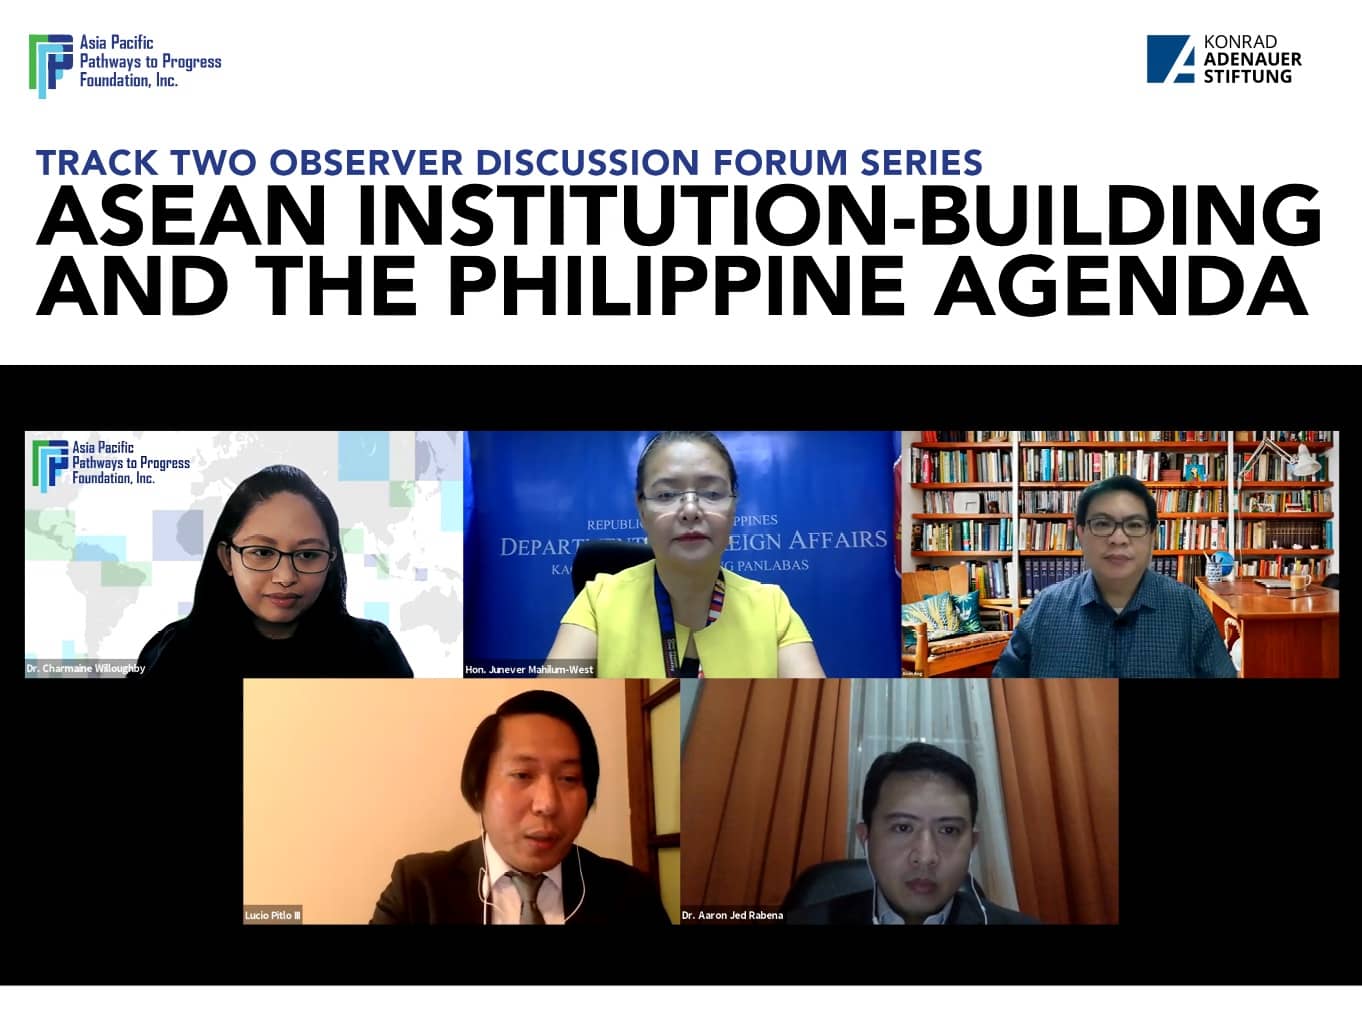 Track Two Observer: ASEAN Institution-Building and the Philippine Agenda